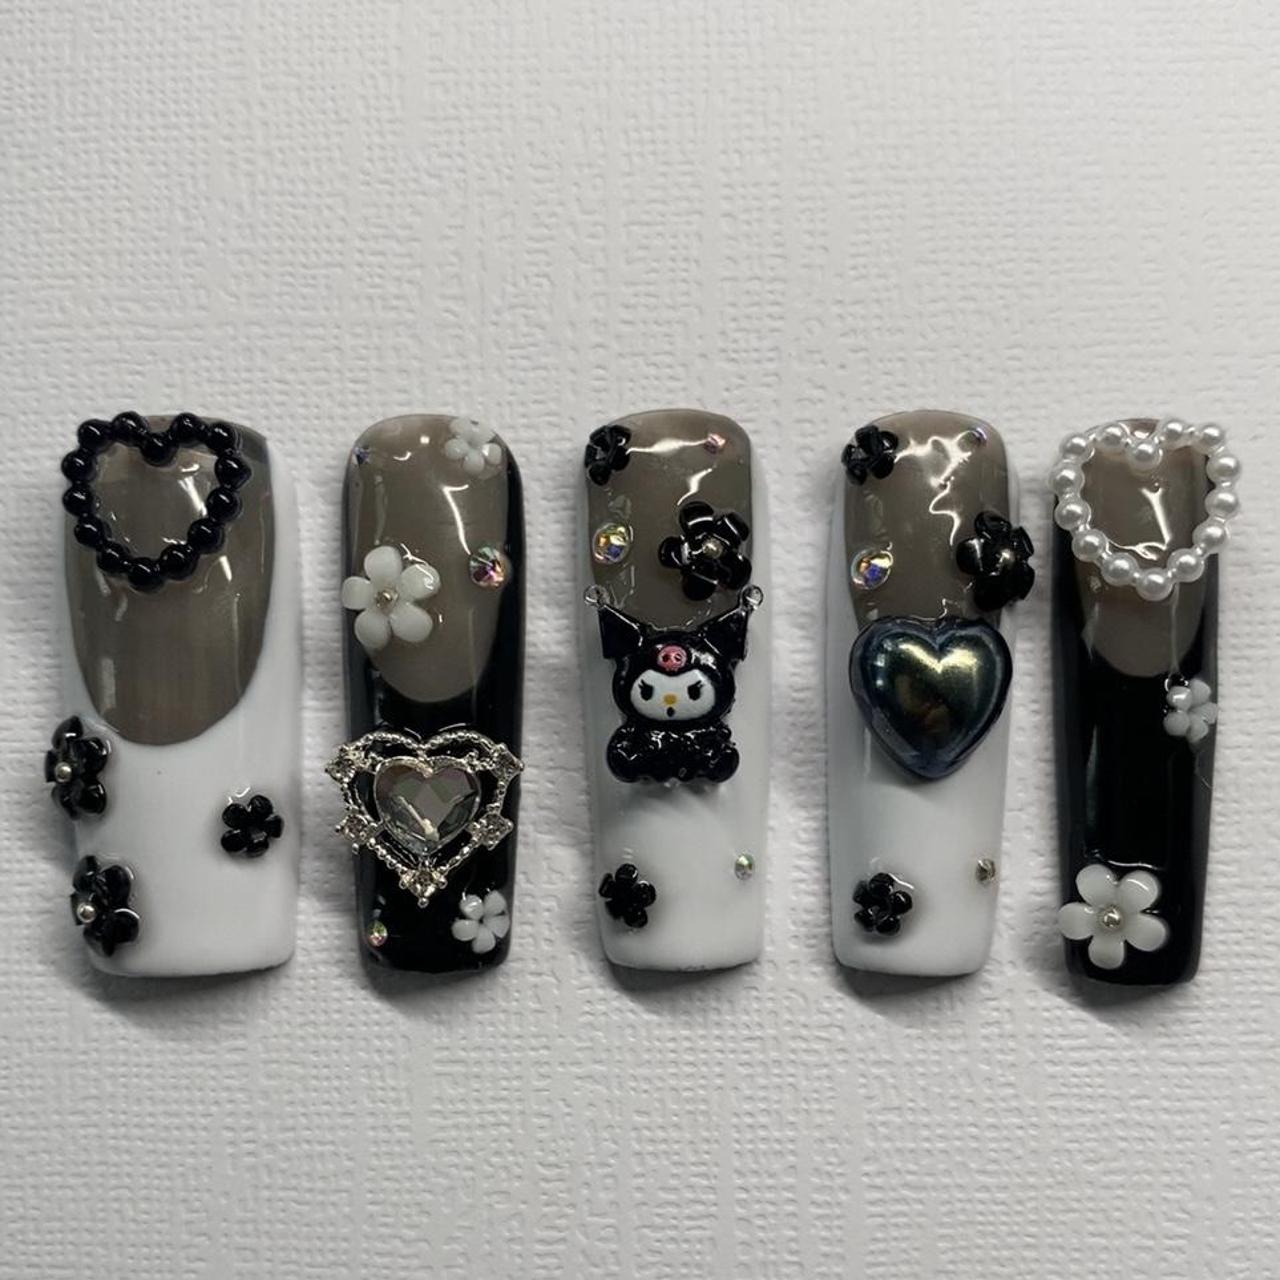 Glossy Black Louis Vuitton Inspired Press on Nails - - Depop